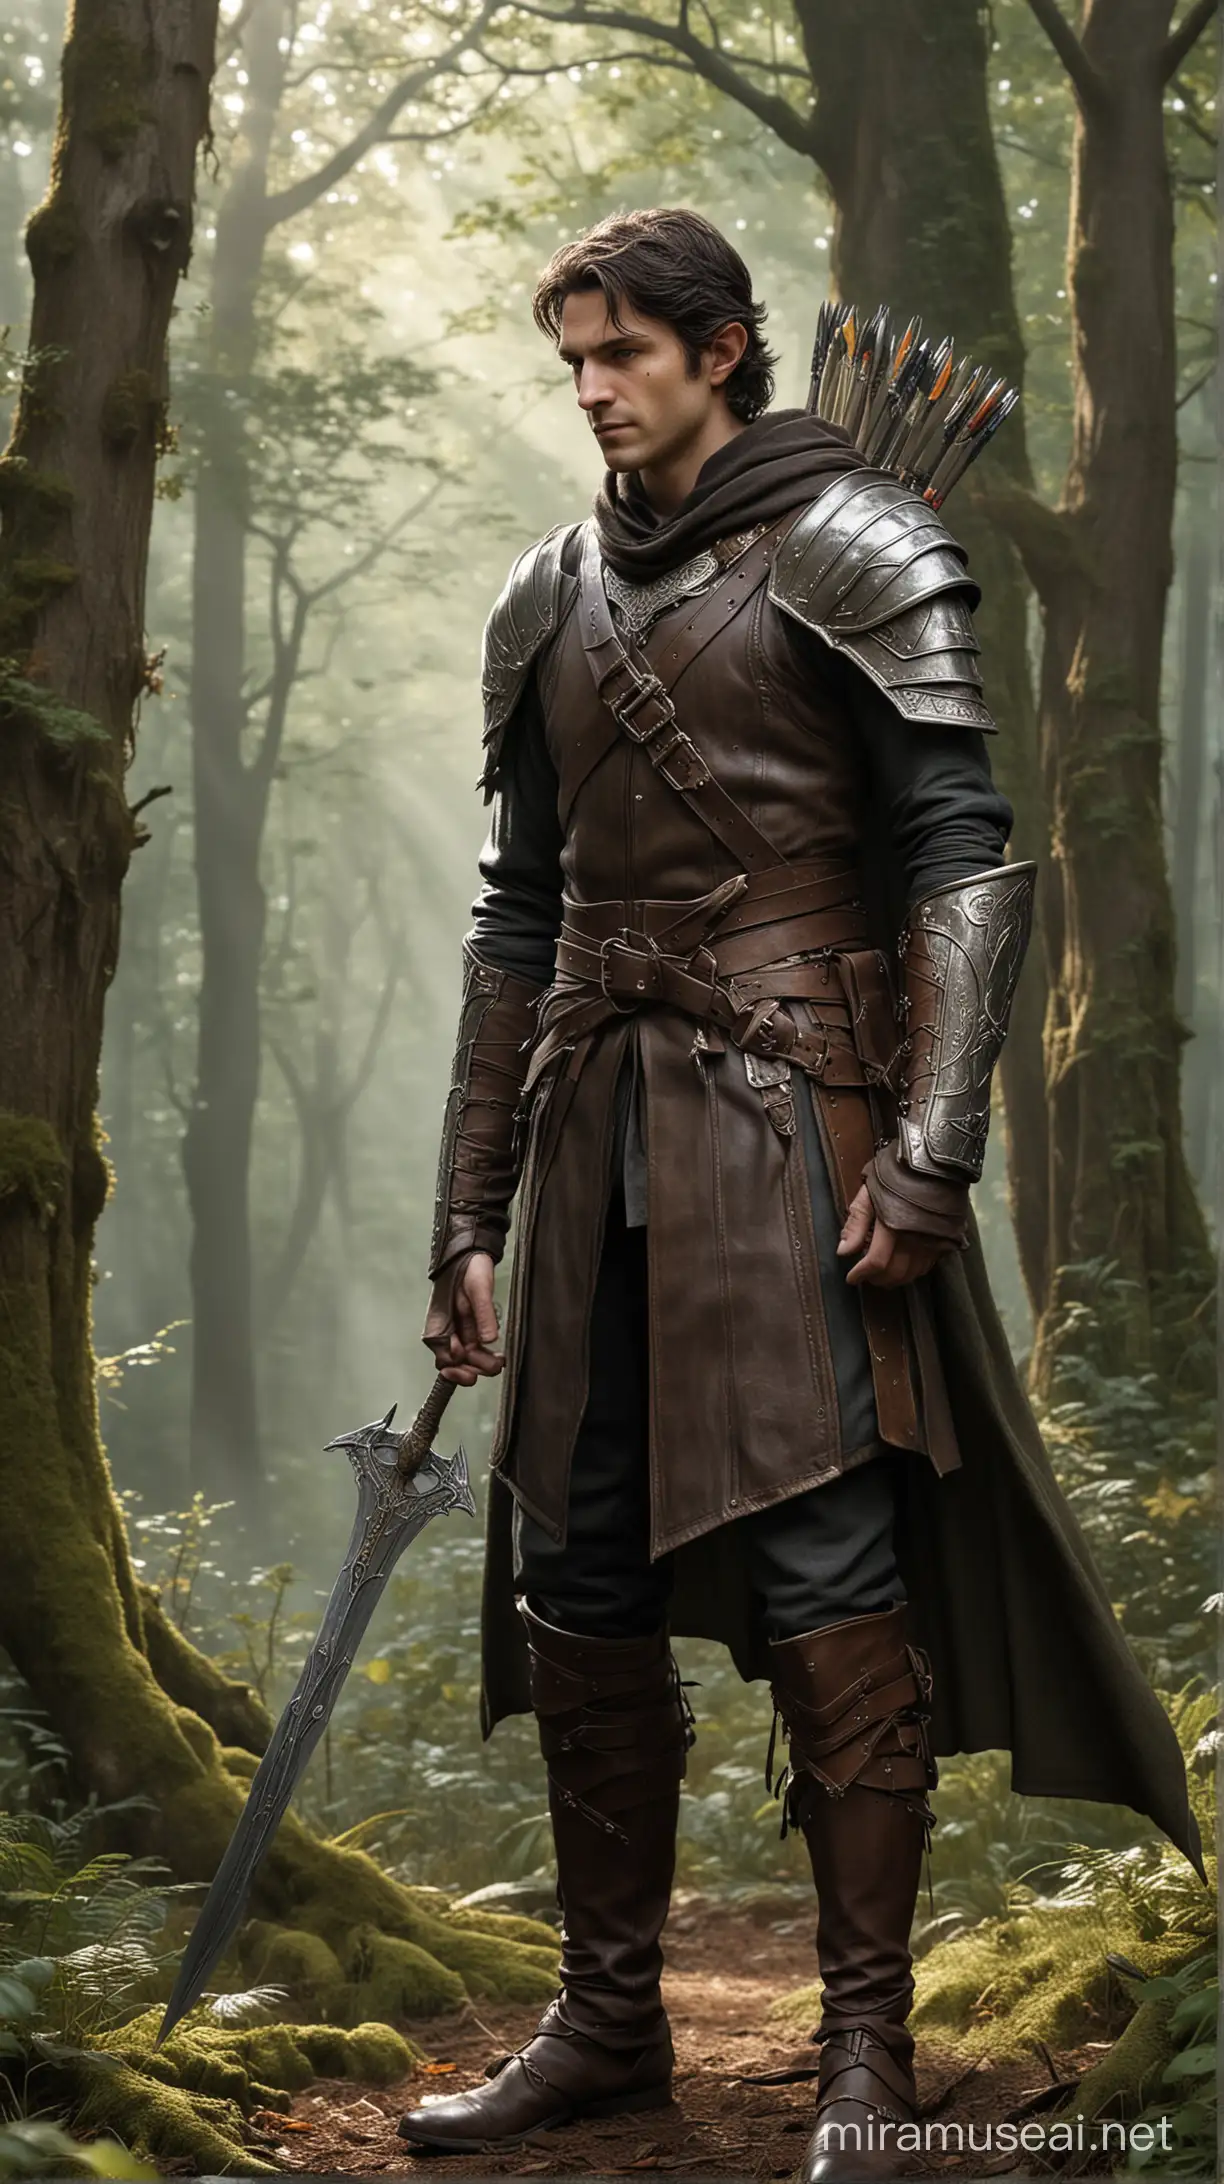 Photorealistic. High resolution. Full body image. As the sun sets over the elven kingdom, a lone figure stands guard. A striking male elf, his middle-aged features enhanced by his high cheekbones and strong jaw. His stubble adds a rugged edge to his otherwise refined appearance. His pointed ears, partially hidden by his hood, hint at his magical abilities. His pale skin and long, dark hair give him an otherworldly aura. His long dark hair is pulled back with a leather headband, revealing his sharp features and amber-colored eyes. He wears a unique set of leather armor, with chainmail peeking out from underneath. The armor is adorned with an array of straps, pouches, and potions, a testament to his preparedness for any danger that may arise. His equipment is a mix of a wizard's, a warrior's, and a thief's, showcasing his diverse skills and abilities. His hooded cloak is pulled up, casting a mysterious shadow over his face, revealing intricate patterns and symbols woven into the fabric. The dark calf-skin leather boots he wears are knee-high, providing both style and functionality. His leather leggings are loose, but tied at the seam, allowing for quick and agile movements as he traverses through the forest. The male elf exudes an air of mystery and danger. As you approach the male elf, you can't help but notice the intricate details of his attire. An elegant longsword hangs in a scabbard at his belt, a weapon of both beauty and power. His hands are empty, but crackling with magical fire, a testament to his mastery of the arcane. Strapped to his thighs are sheaths containing sharp daggers, ready to be drawn at a moment's notice. On his back rests a beautifully crafted longbow, its dark wood contrasting against the silver fittings. A quiver filled with arrows hangs from his shoulder, a testament to his skill and precision in archery. This elf is a force to be reckoned with.